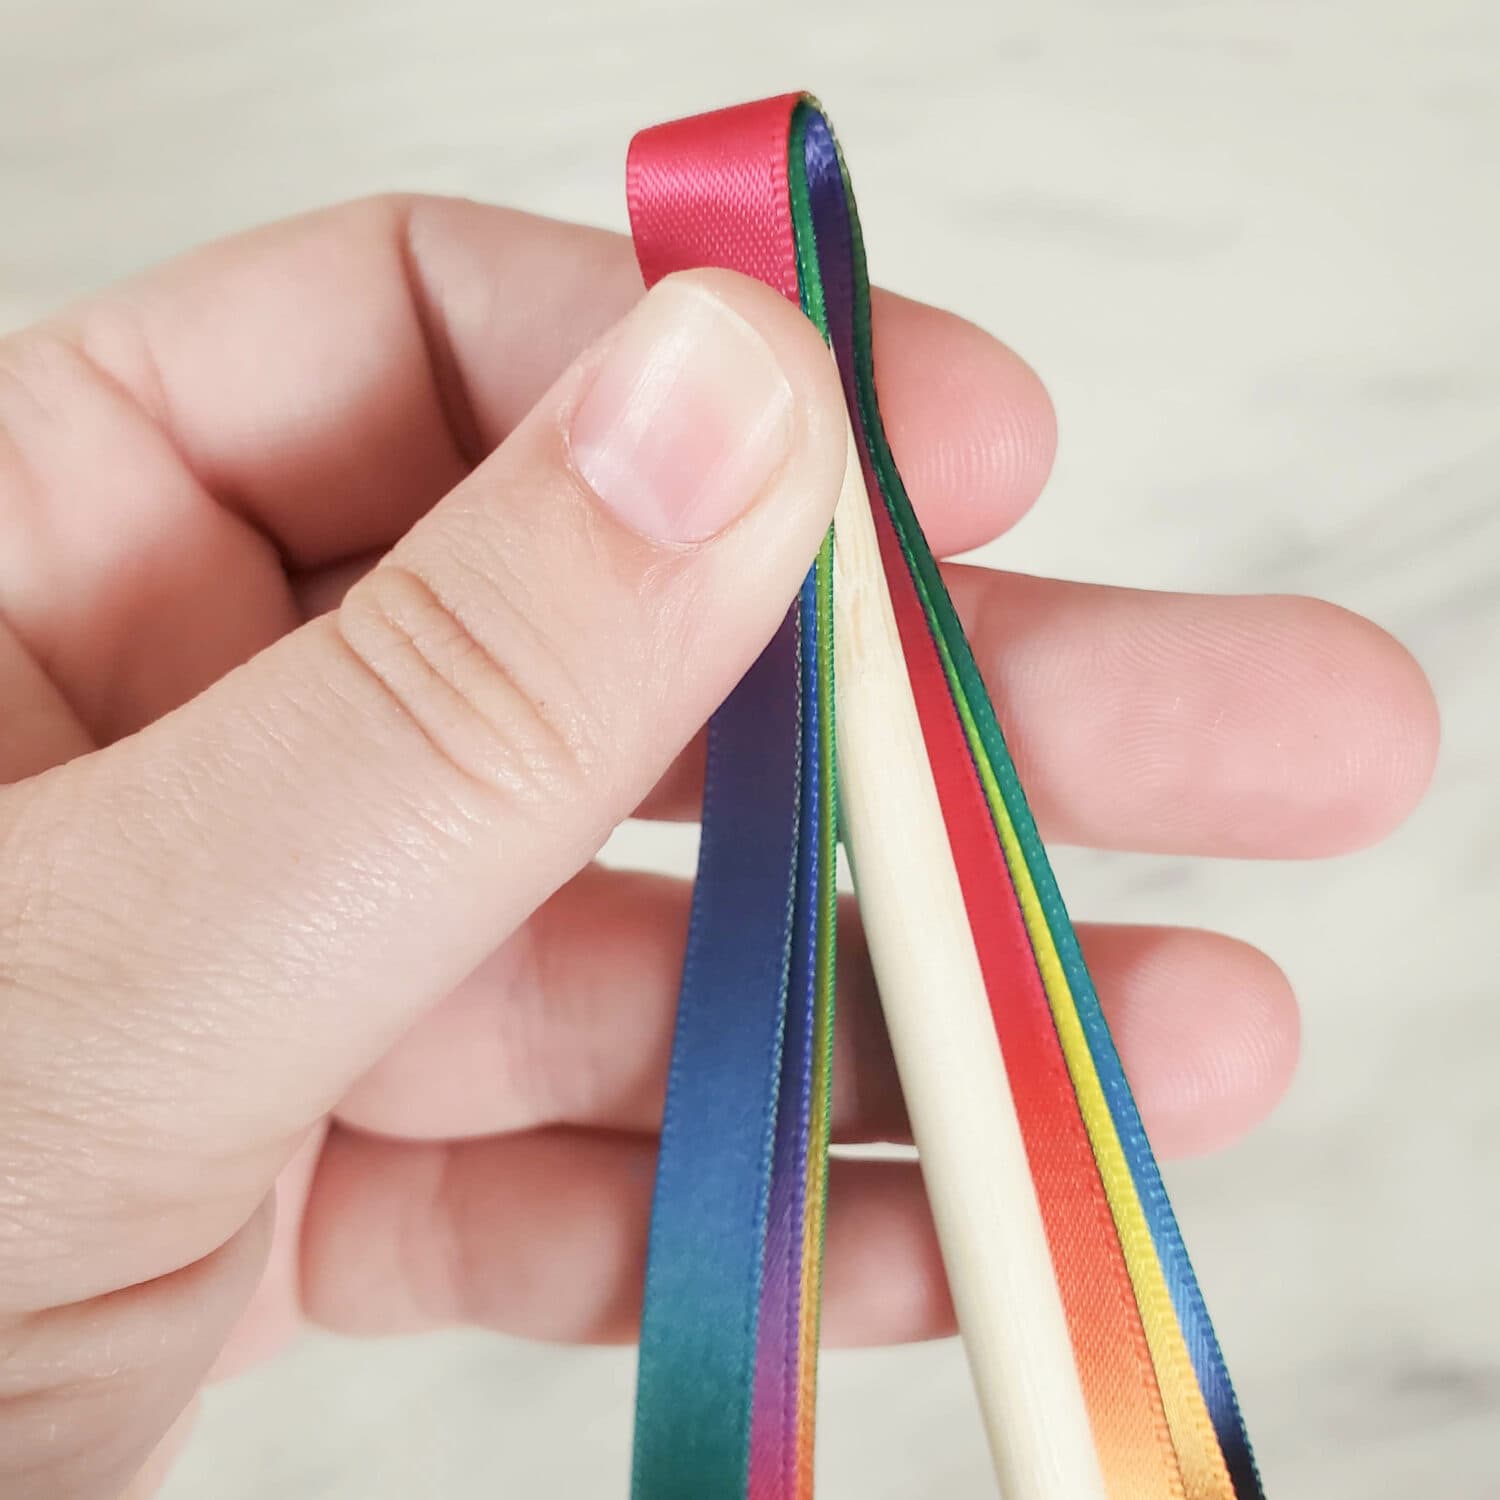 Easy DIY Tutorial with step-by-step directions for How to Make Ribbon Wands! Bright and colorful with multi-colored ribbons for unique dance ribbon wands for music, singing time, preschool kids on up! Created by an LDS Primary music leader.